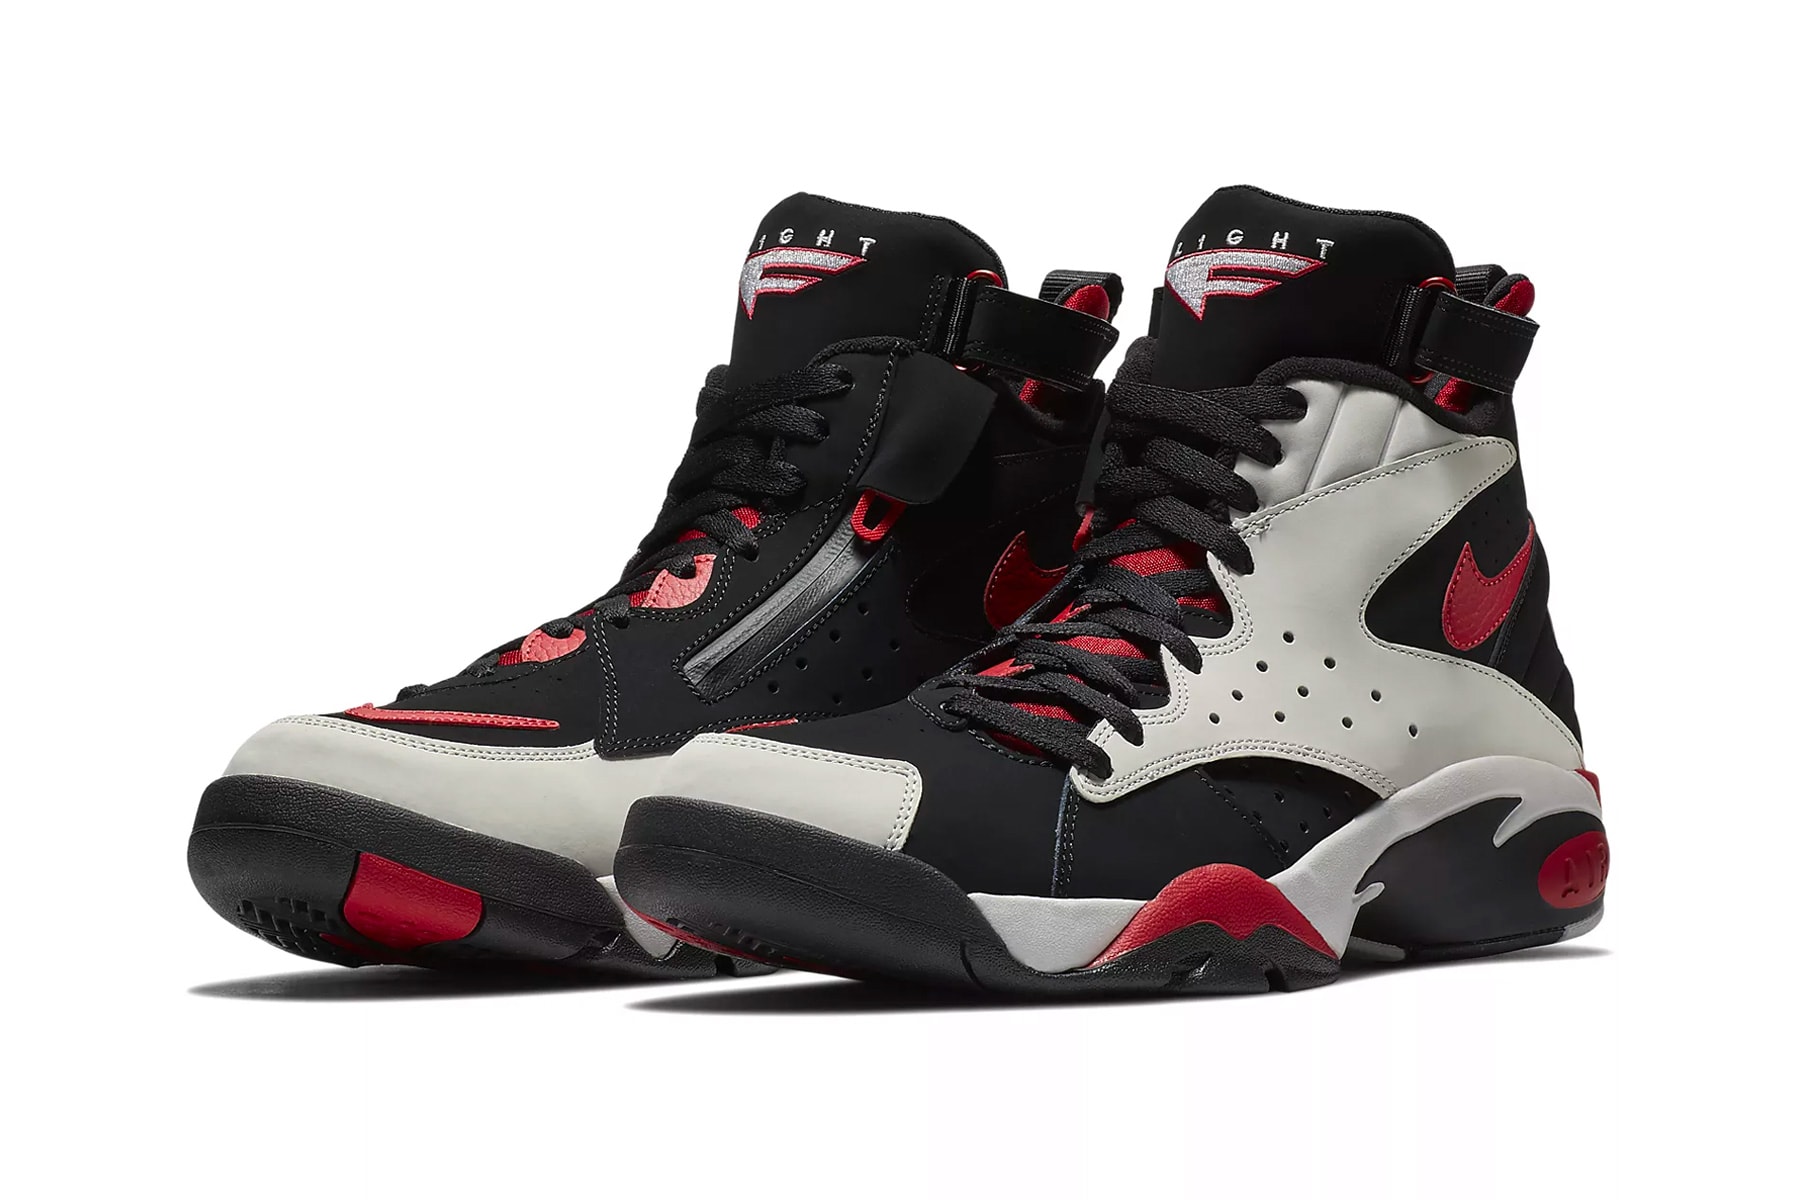 Nike Air Maestro II LTD "Gym Red" Available Now release date sneaker scottie pippen basketball 